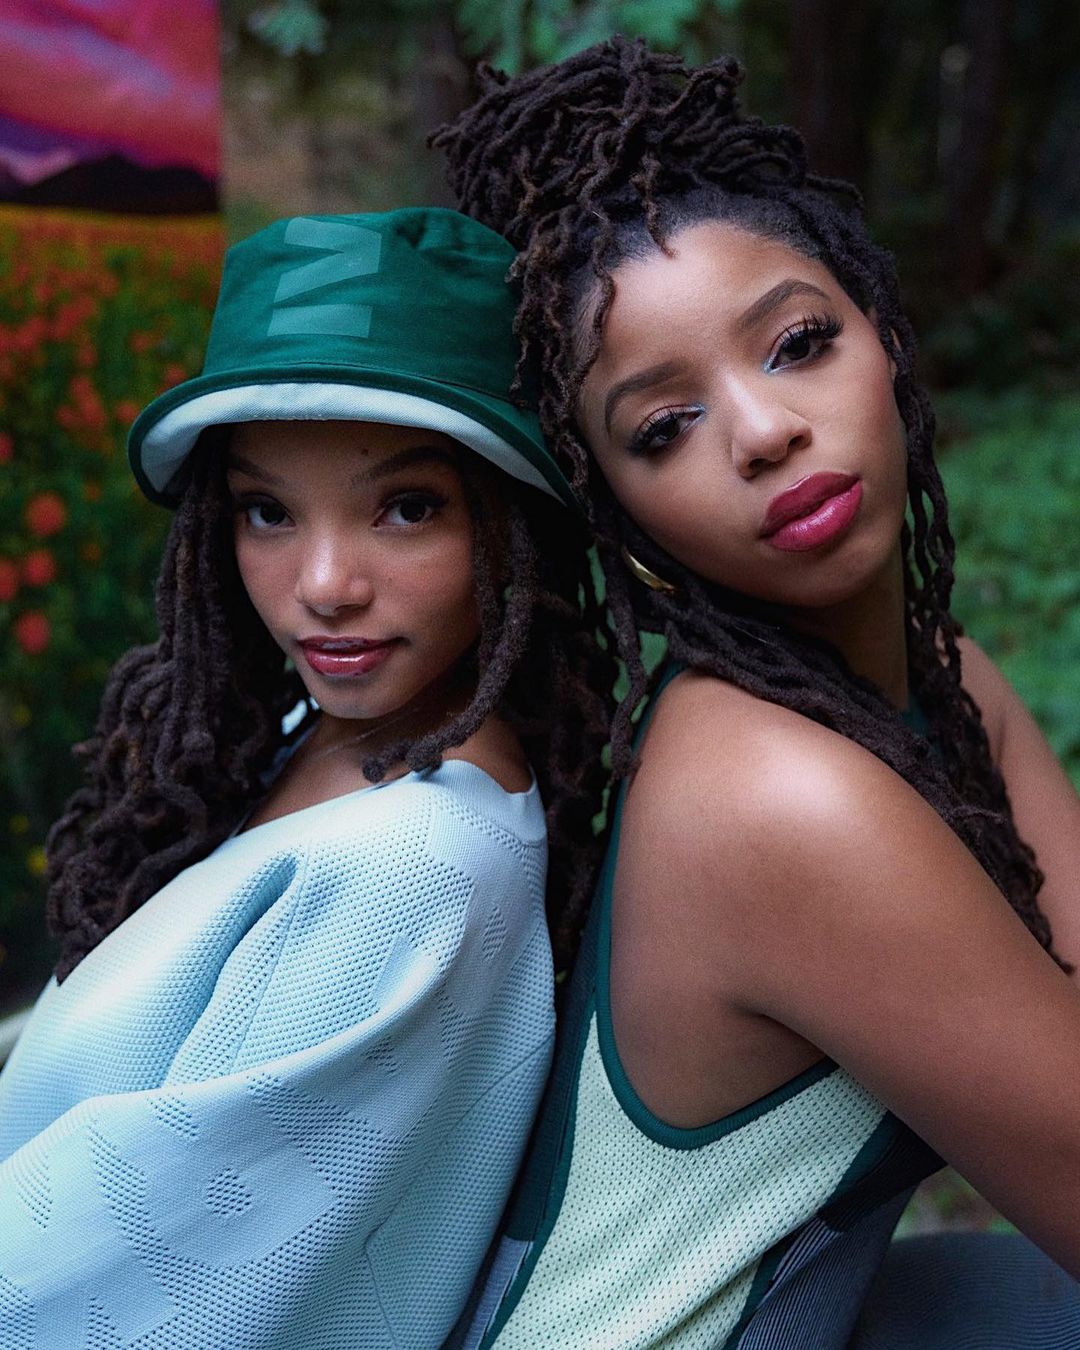 Check Out All Of The Images From Chloe x Halle’s Ivy Park Shoot